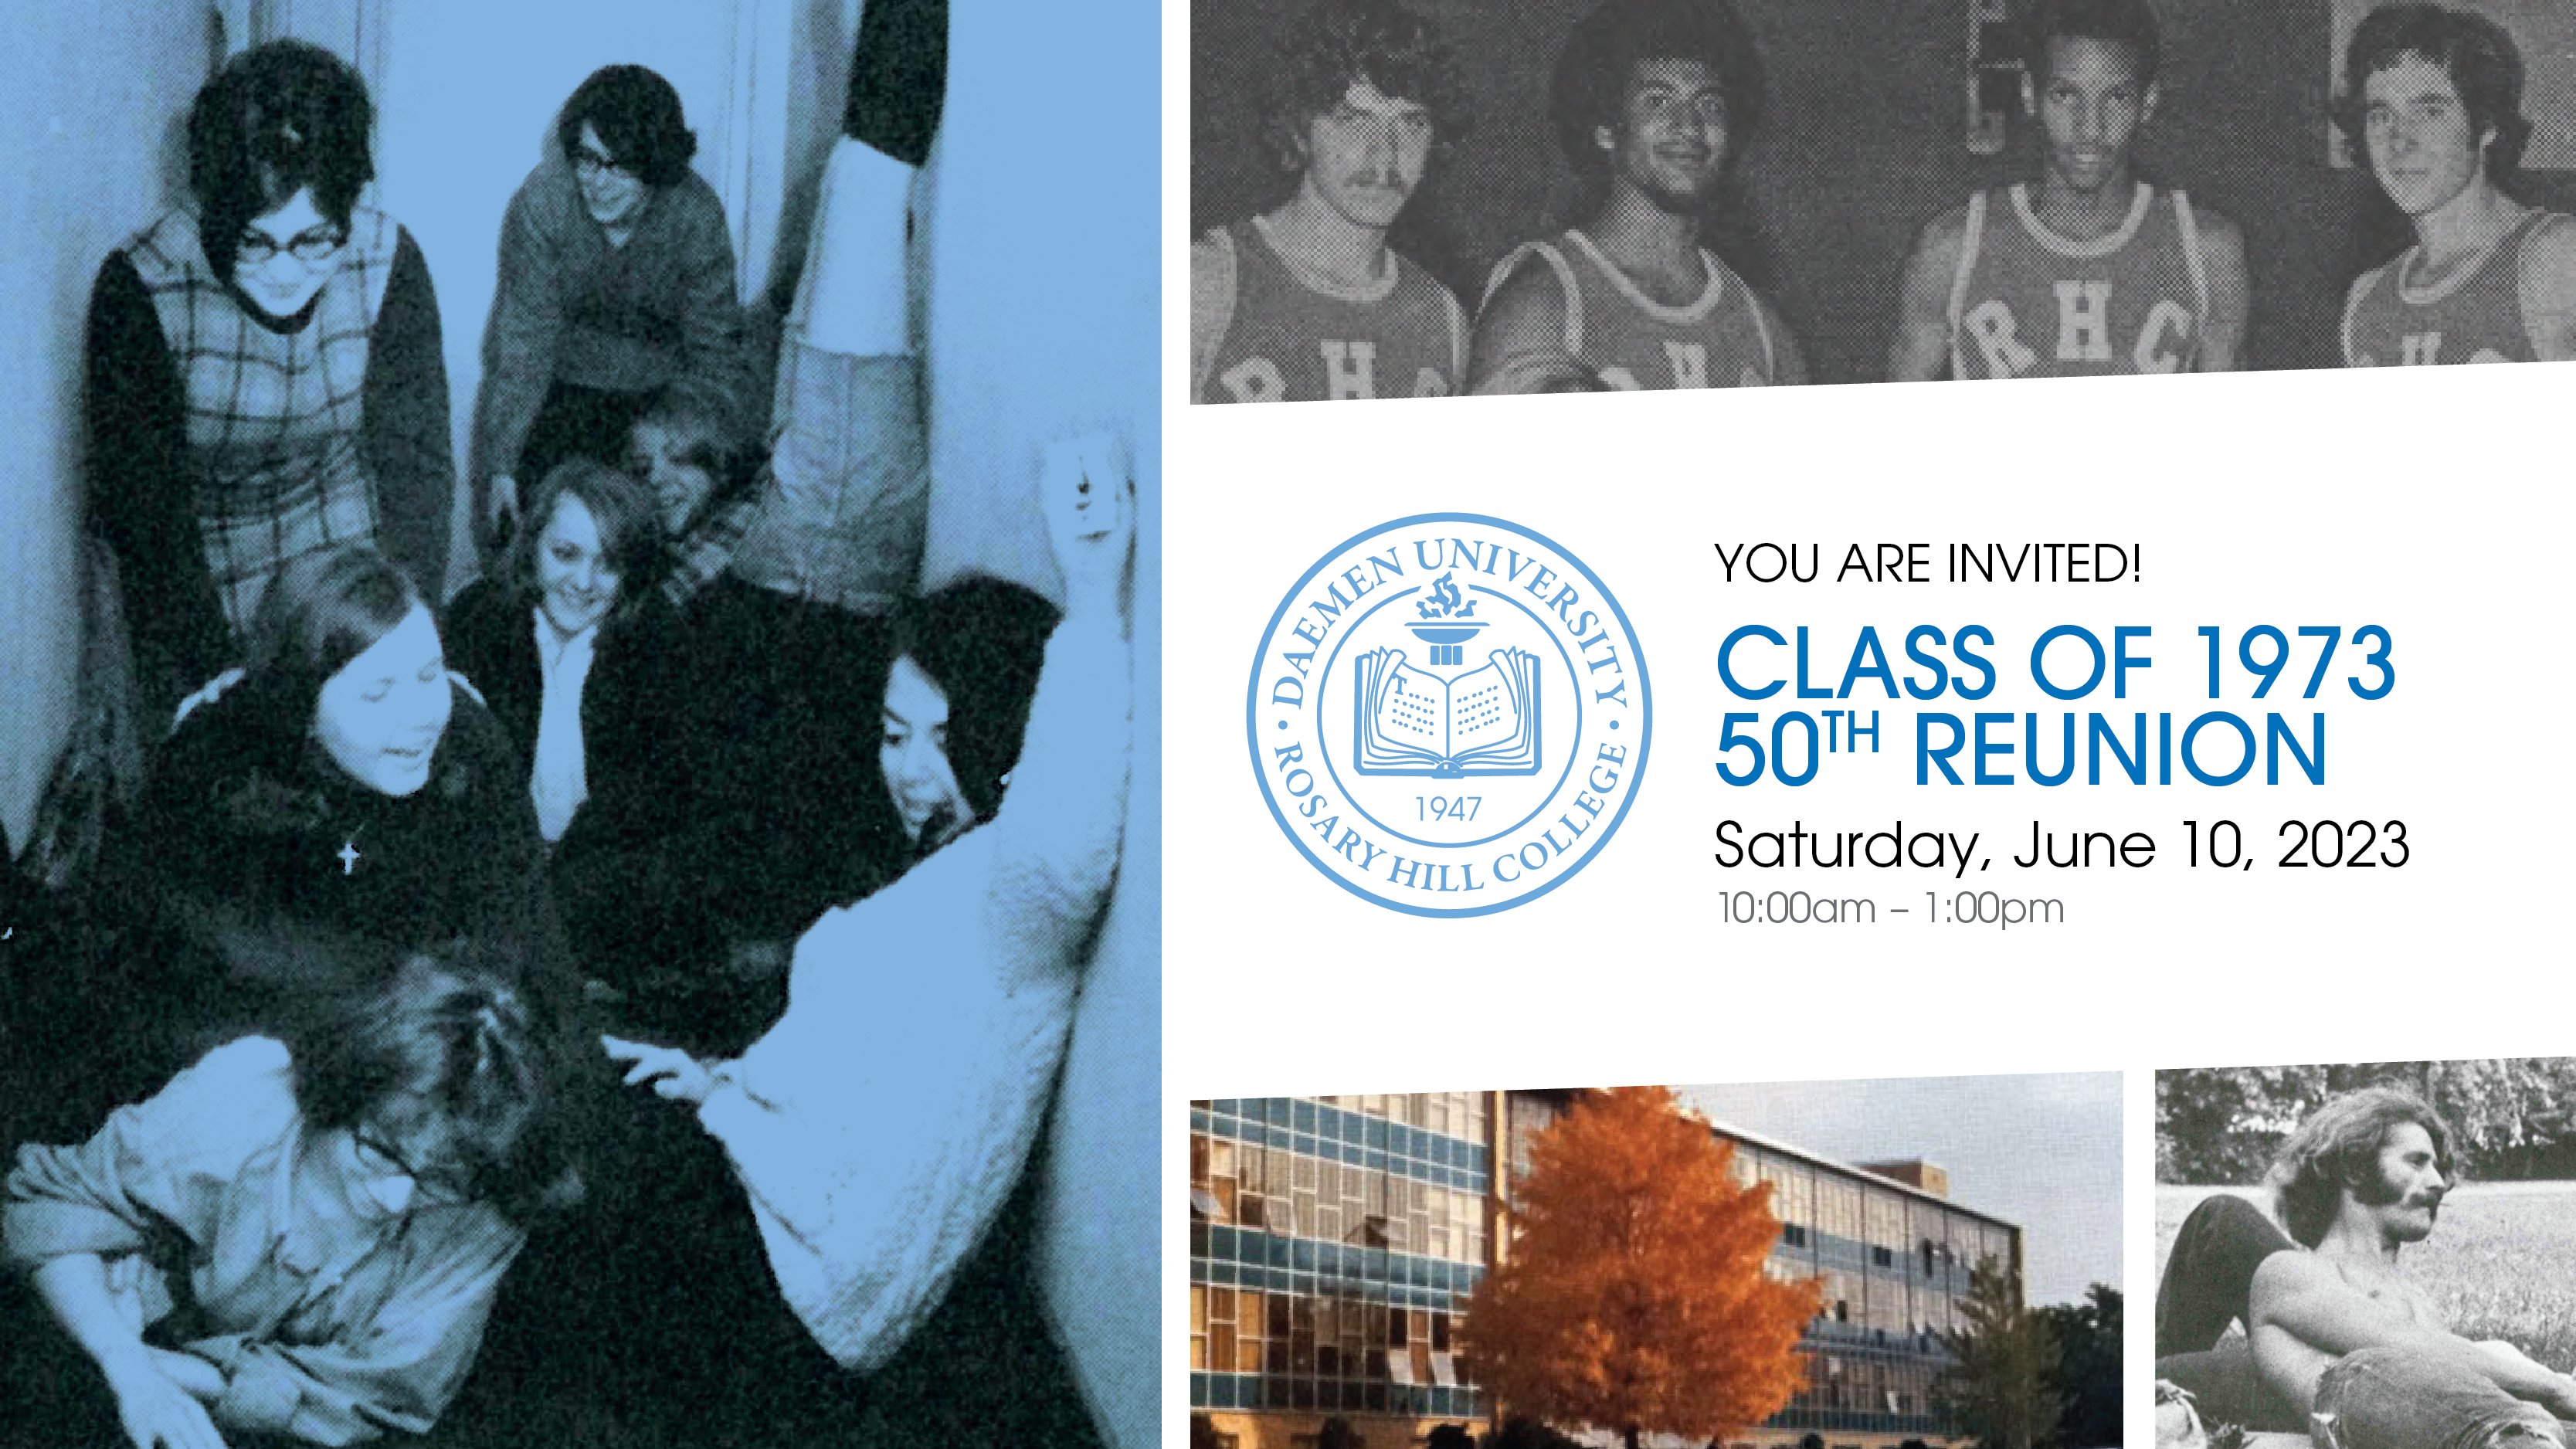 Join the Class of 1973 for a 50th Reunion brunch at Daemen University! 